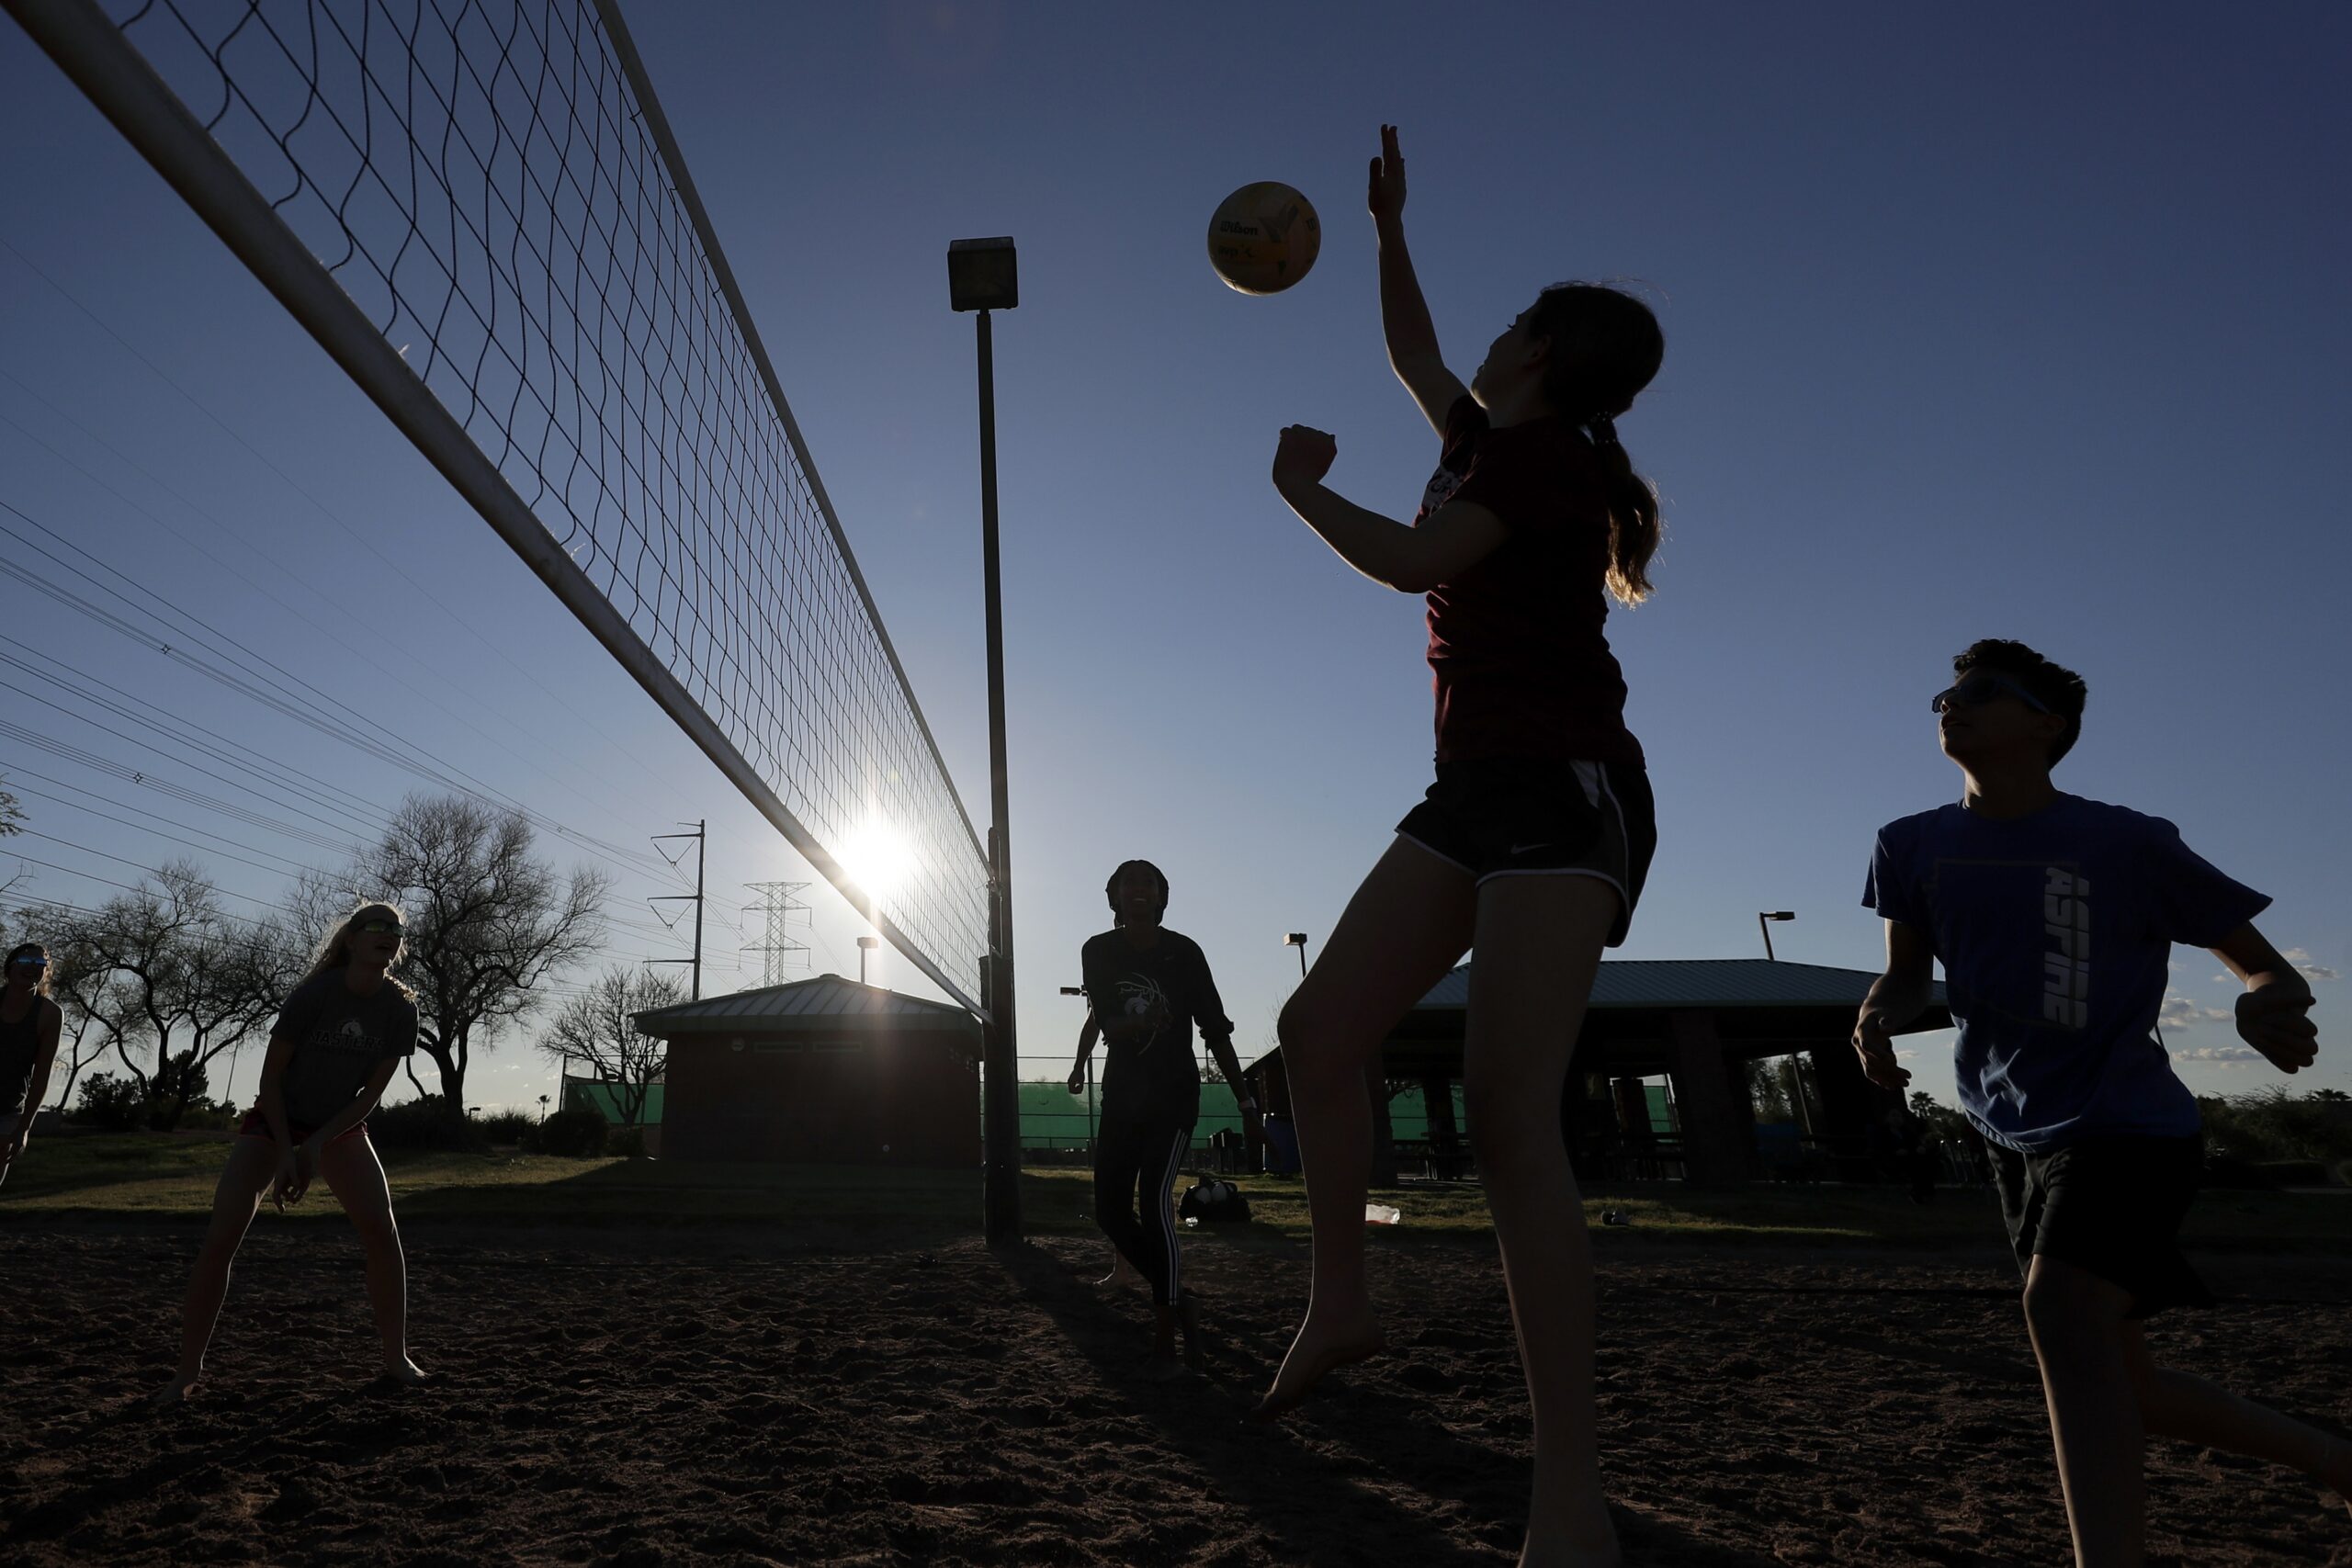 Friends gather to play volleyball at a local park during the coronavirus pandemic